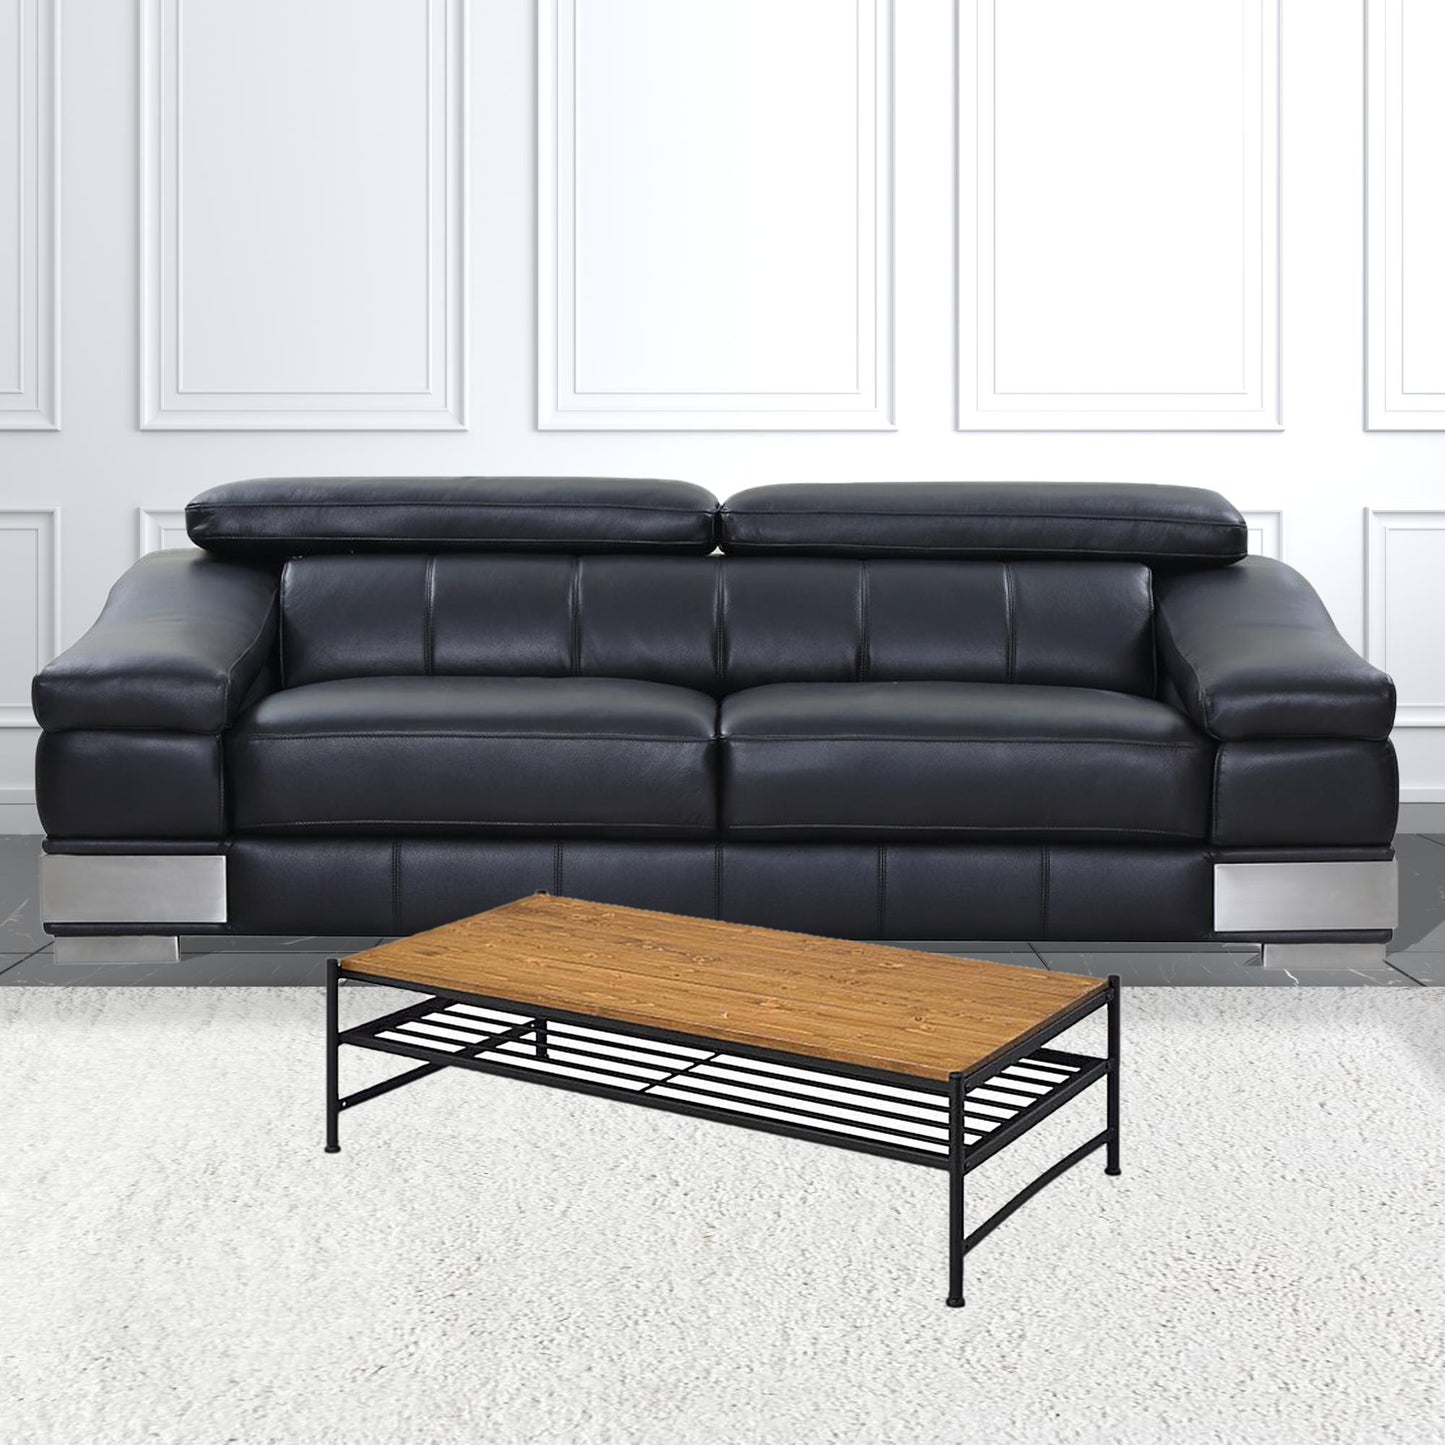 47" Black And Oak Solid Wood Rectangular Coffee Table With Shelf By Homeroots